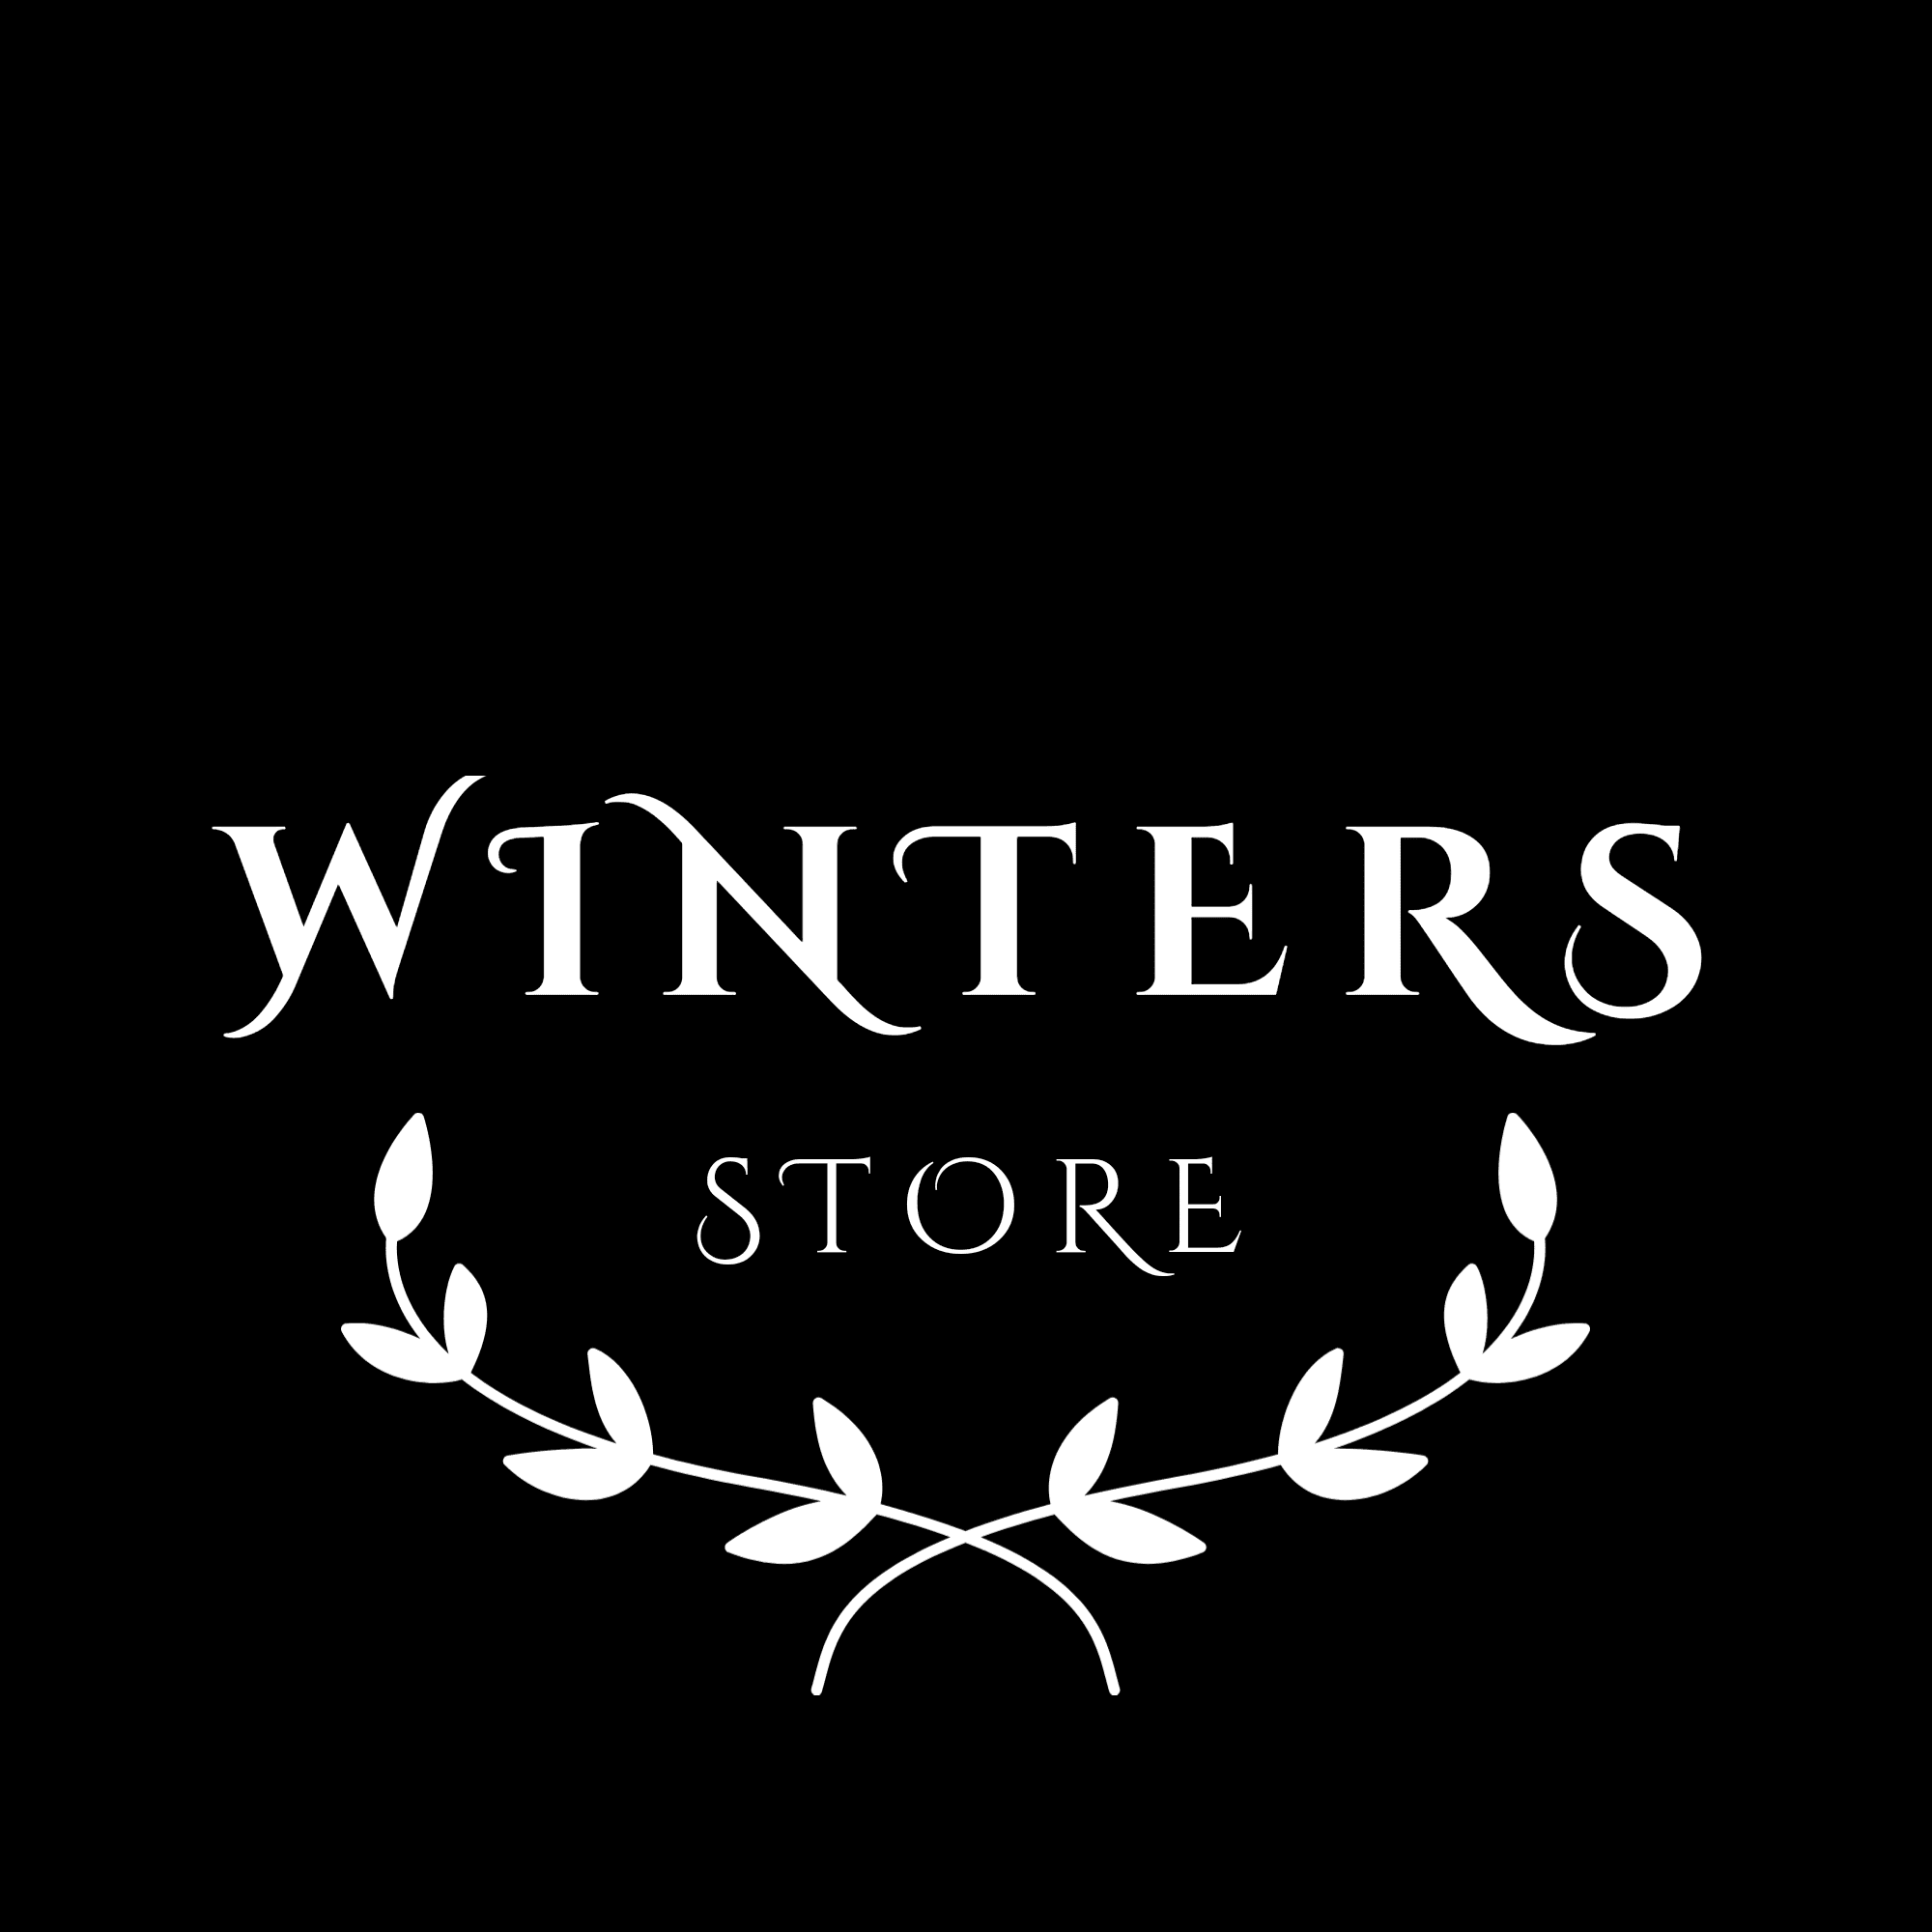 Winters Store